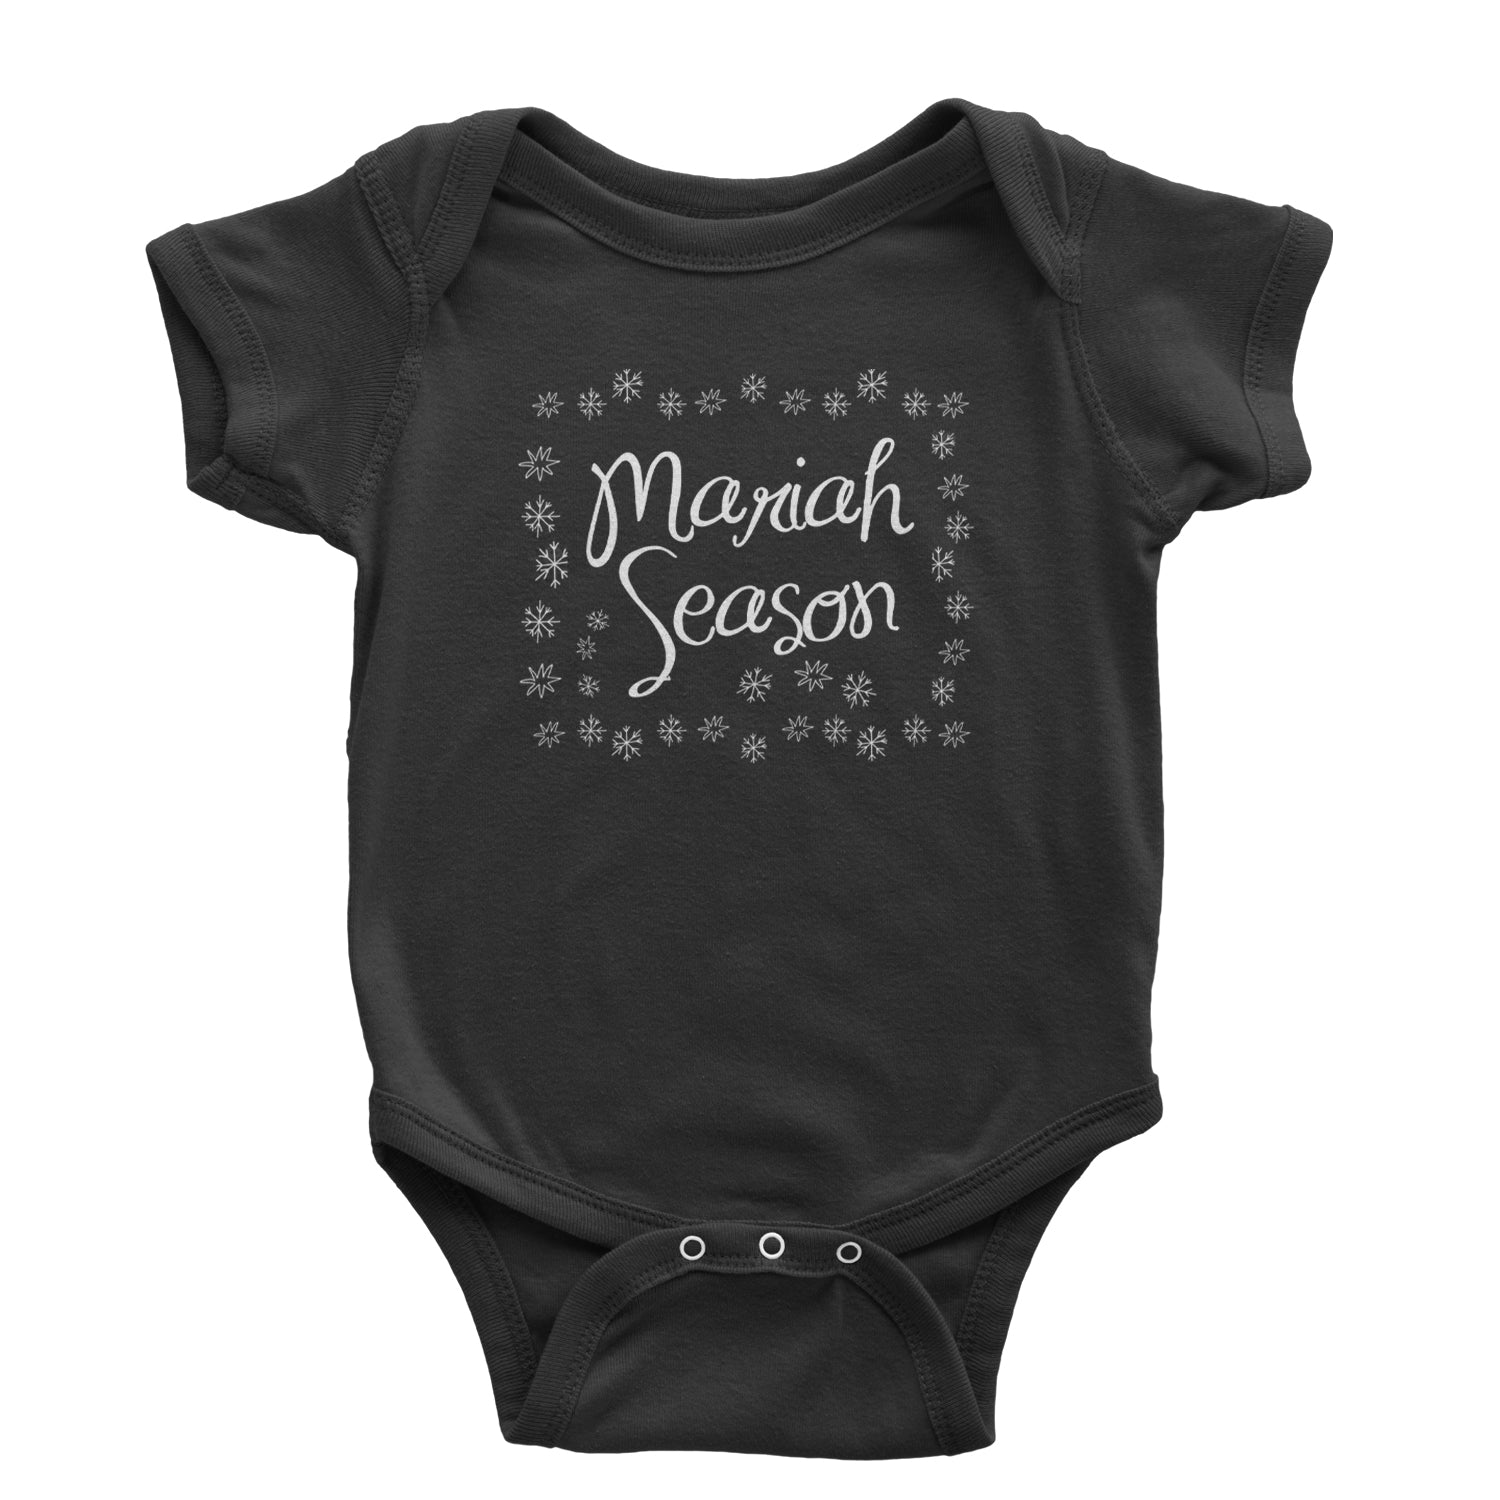 Mariah Season Christmas Holiday Infant One-Piece Romper Bodysuit and Toddler T-shirt